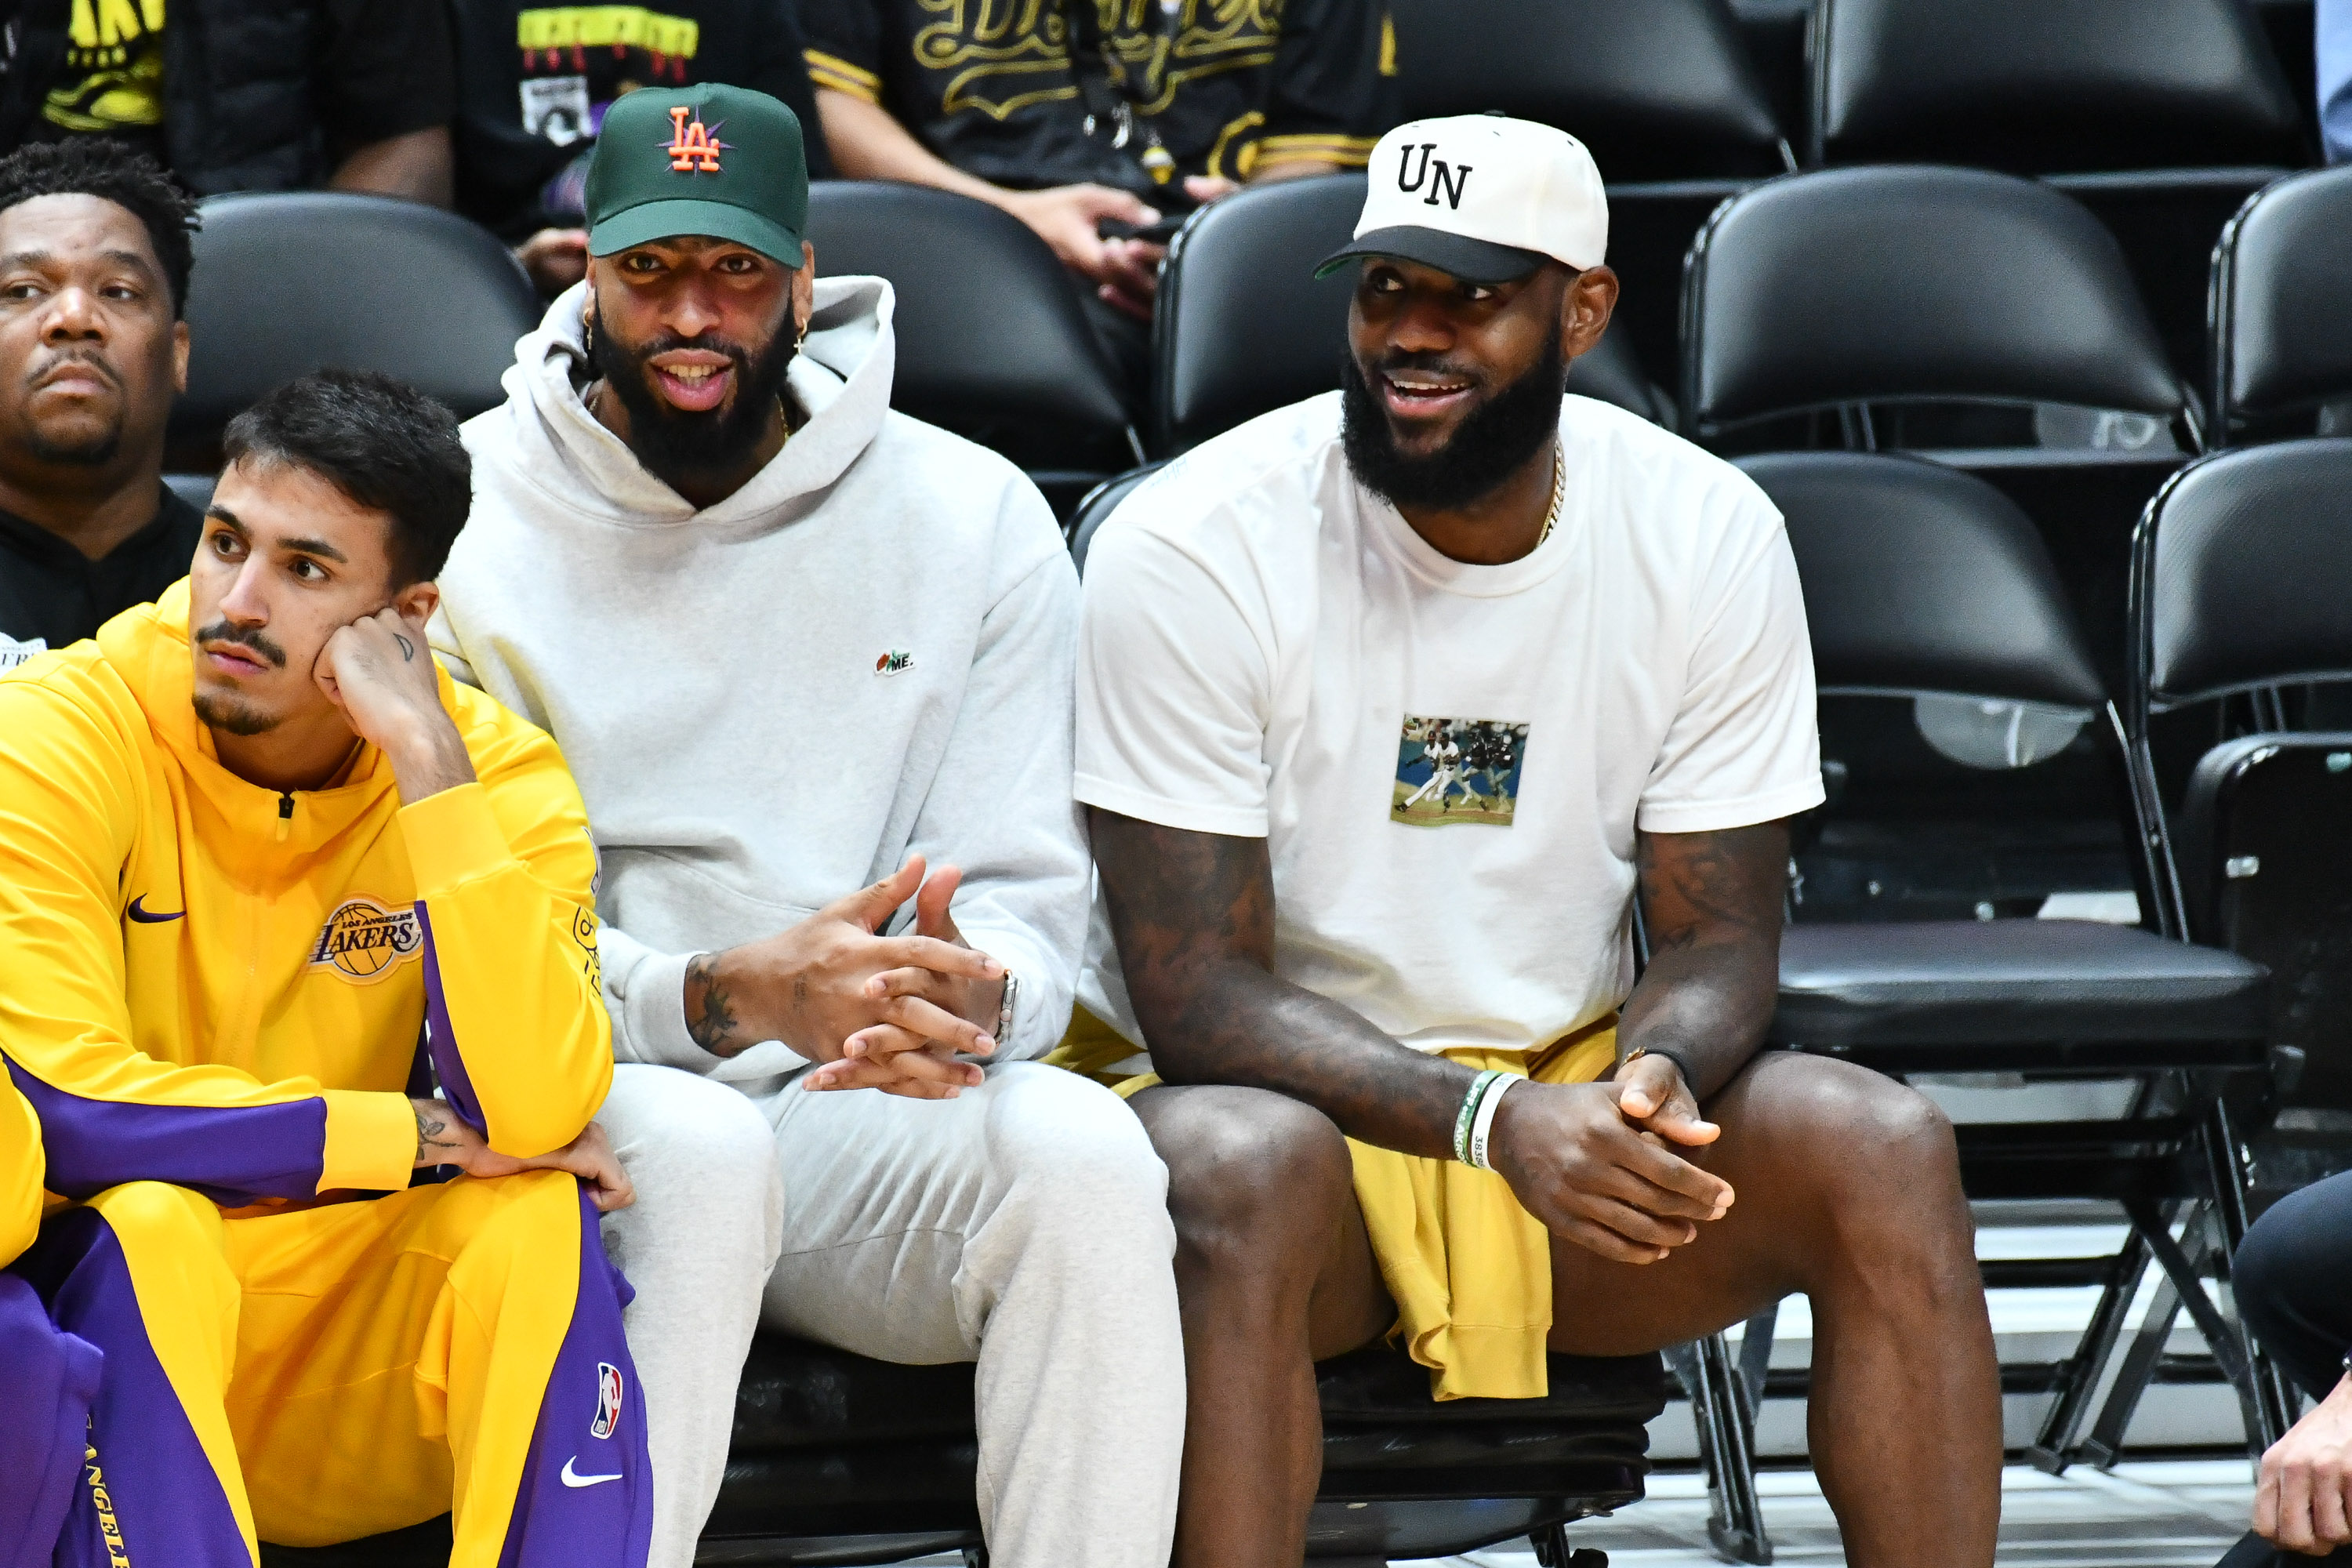 Lakers' LeBron James Will Give Anthony Davis No. 23 Jersey for 2021-22  Season, News, Scores, Highlights, Stats, and Rumors